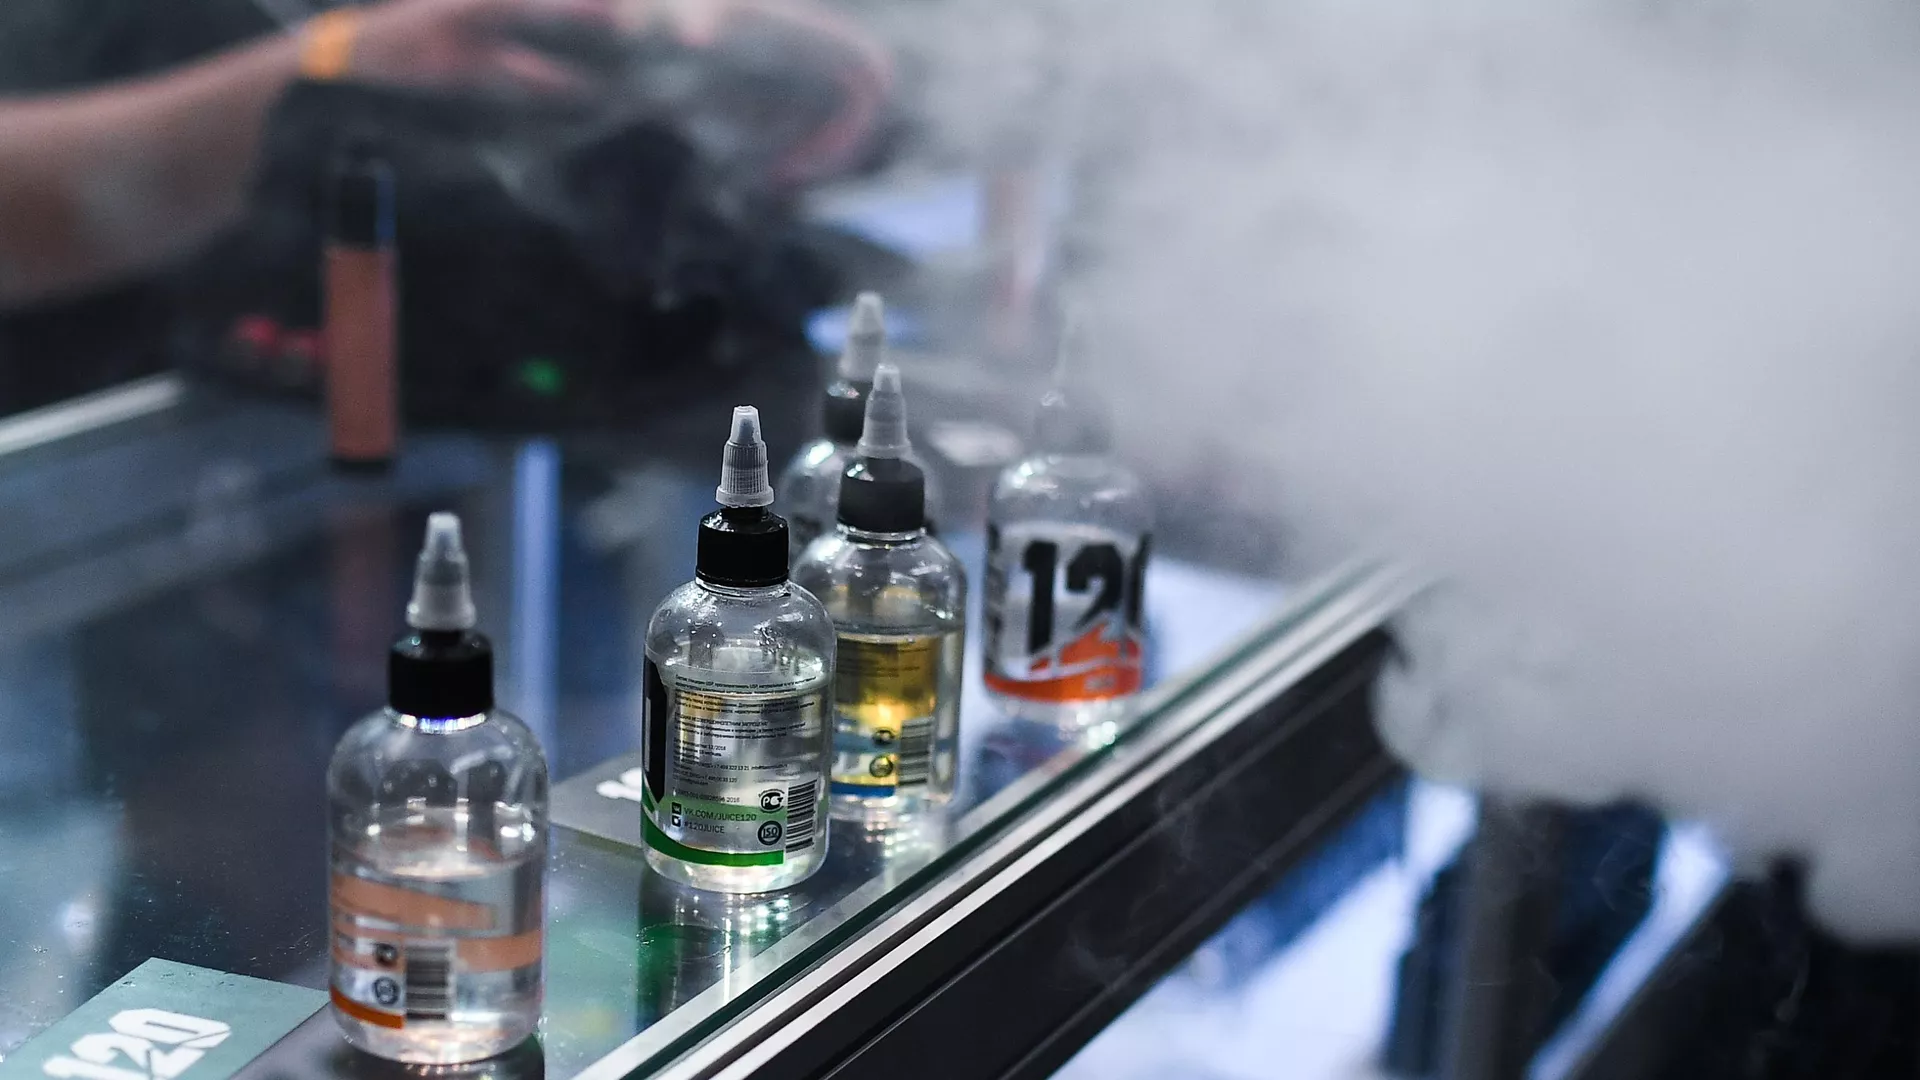 Russian Researchers Tap into New Medical Frontiers with E-Cigarette Liquid